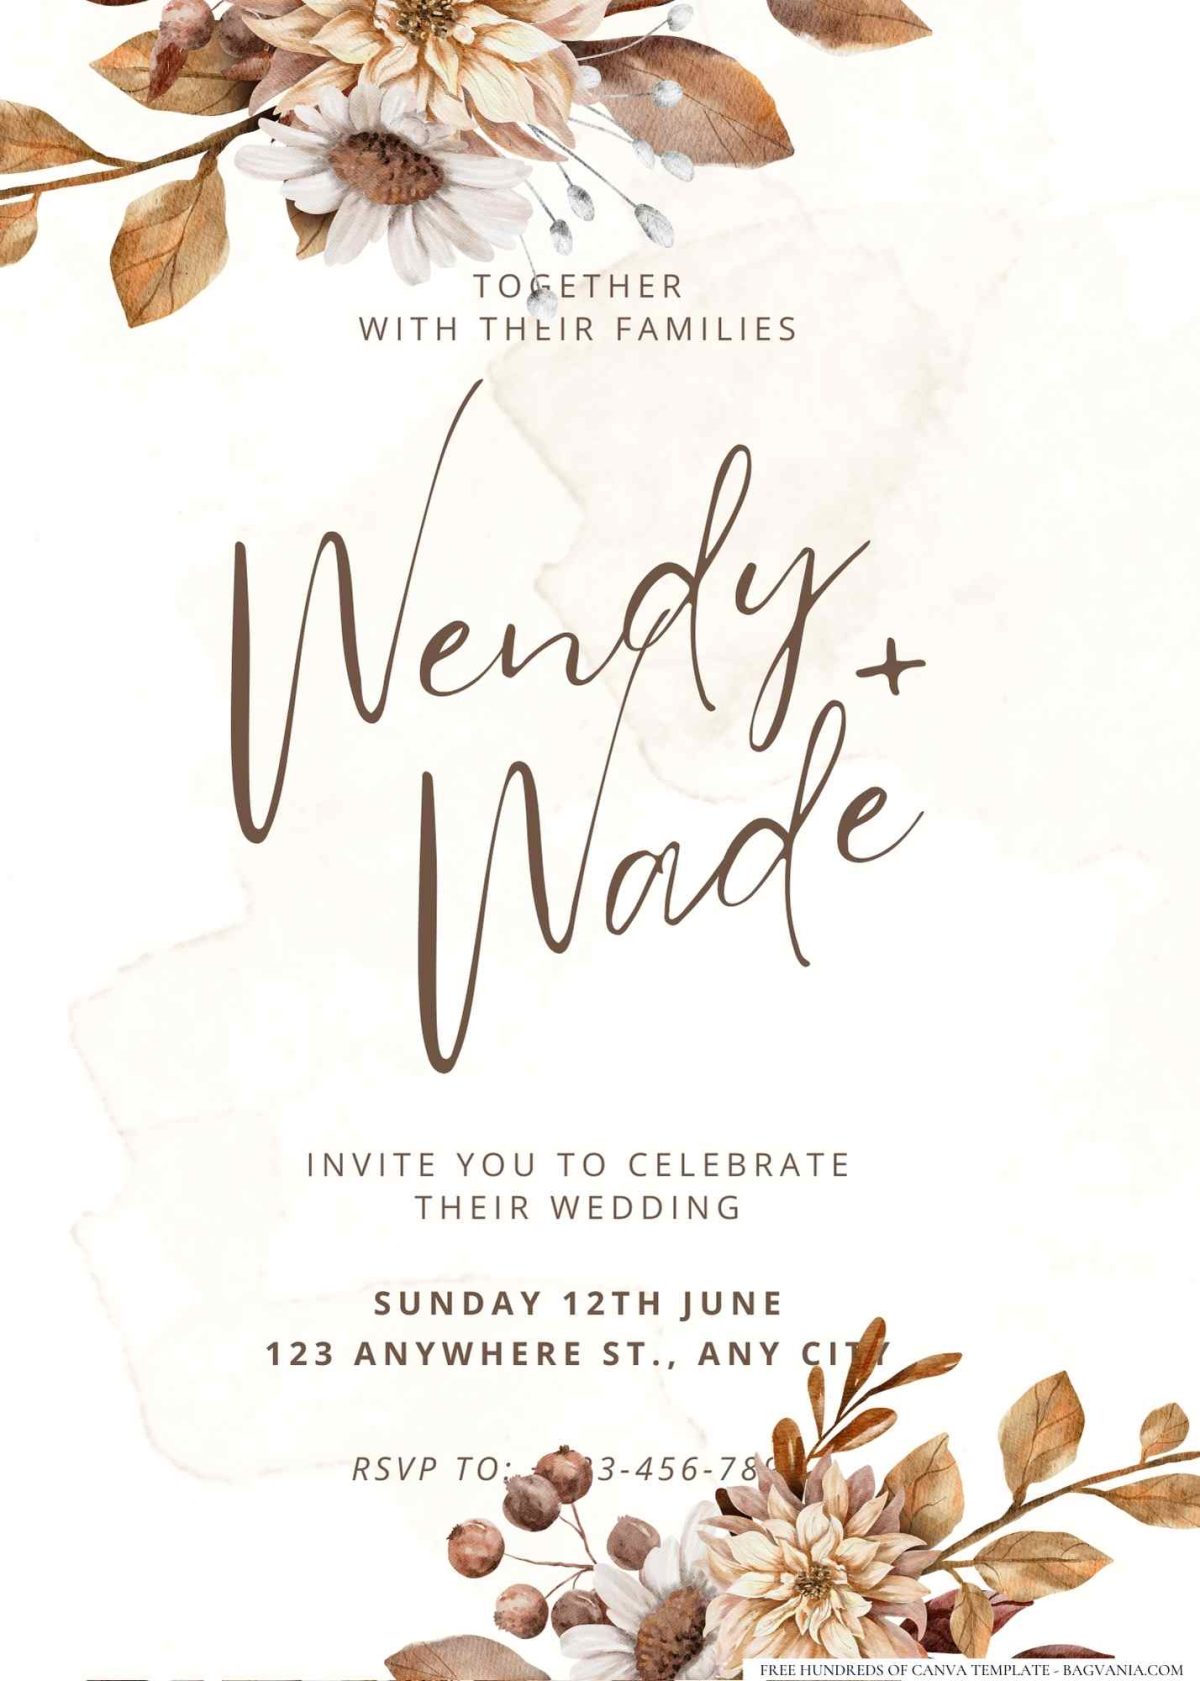 FREE Editable vintage floral patterns with an elegant touch wedding invitation